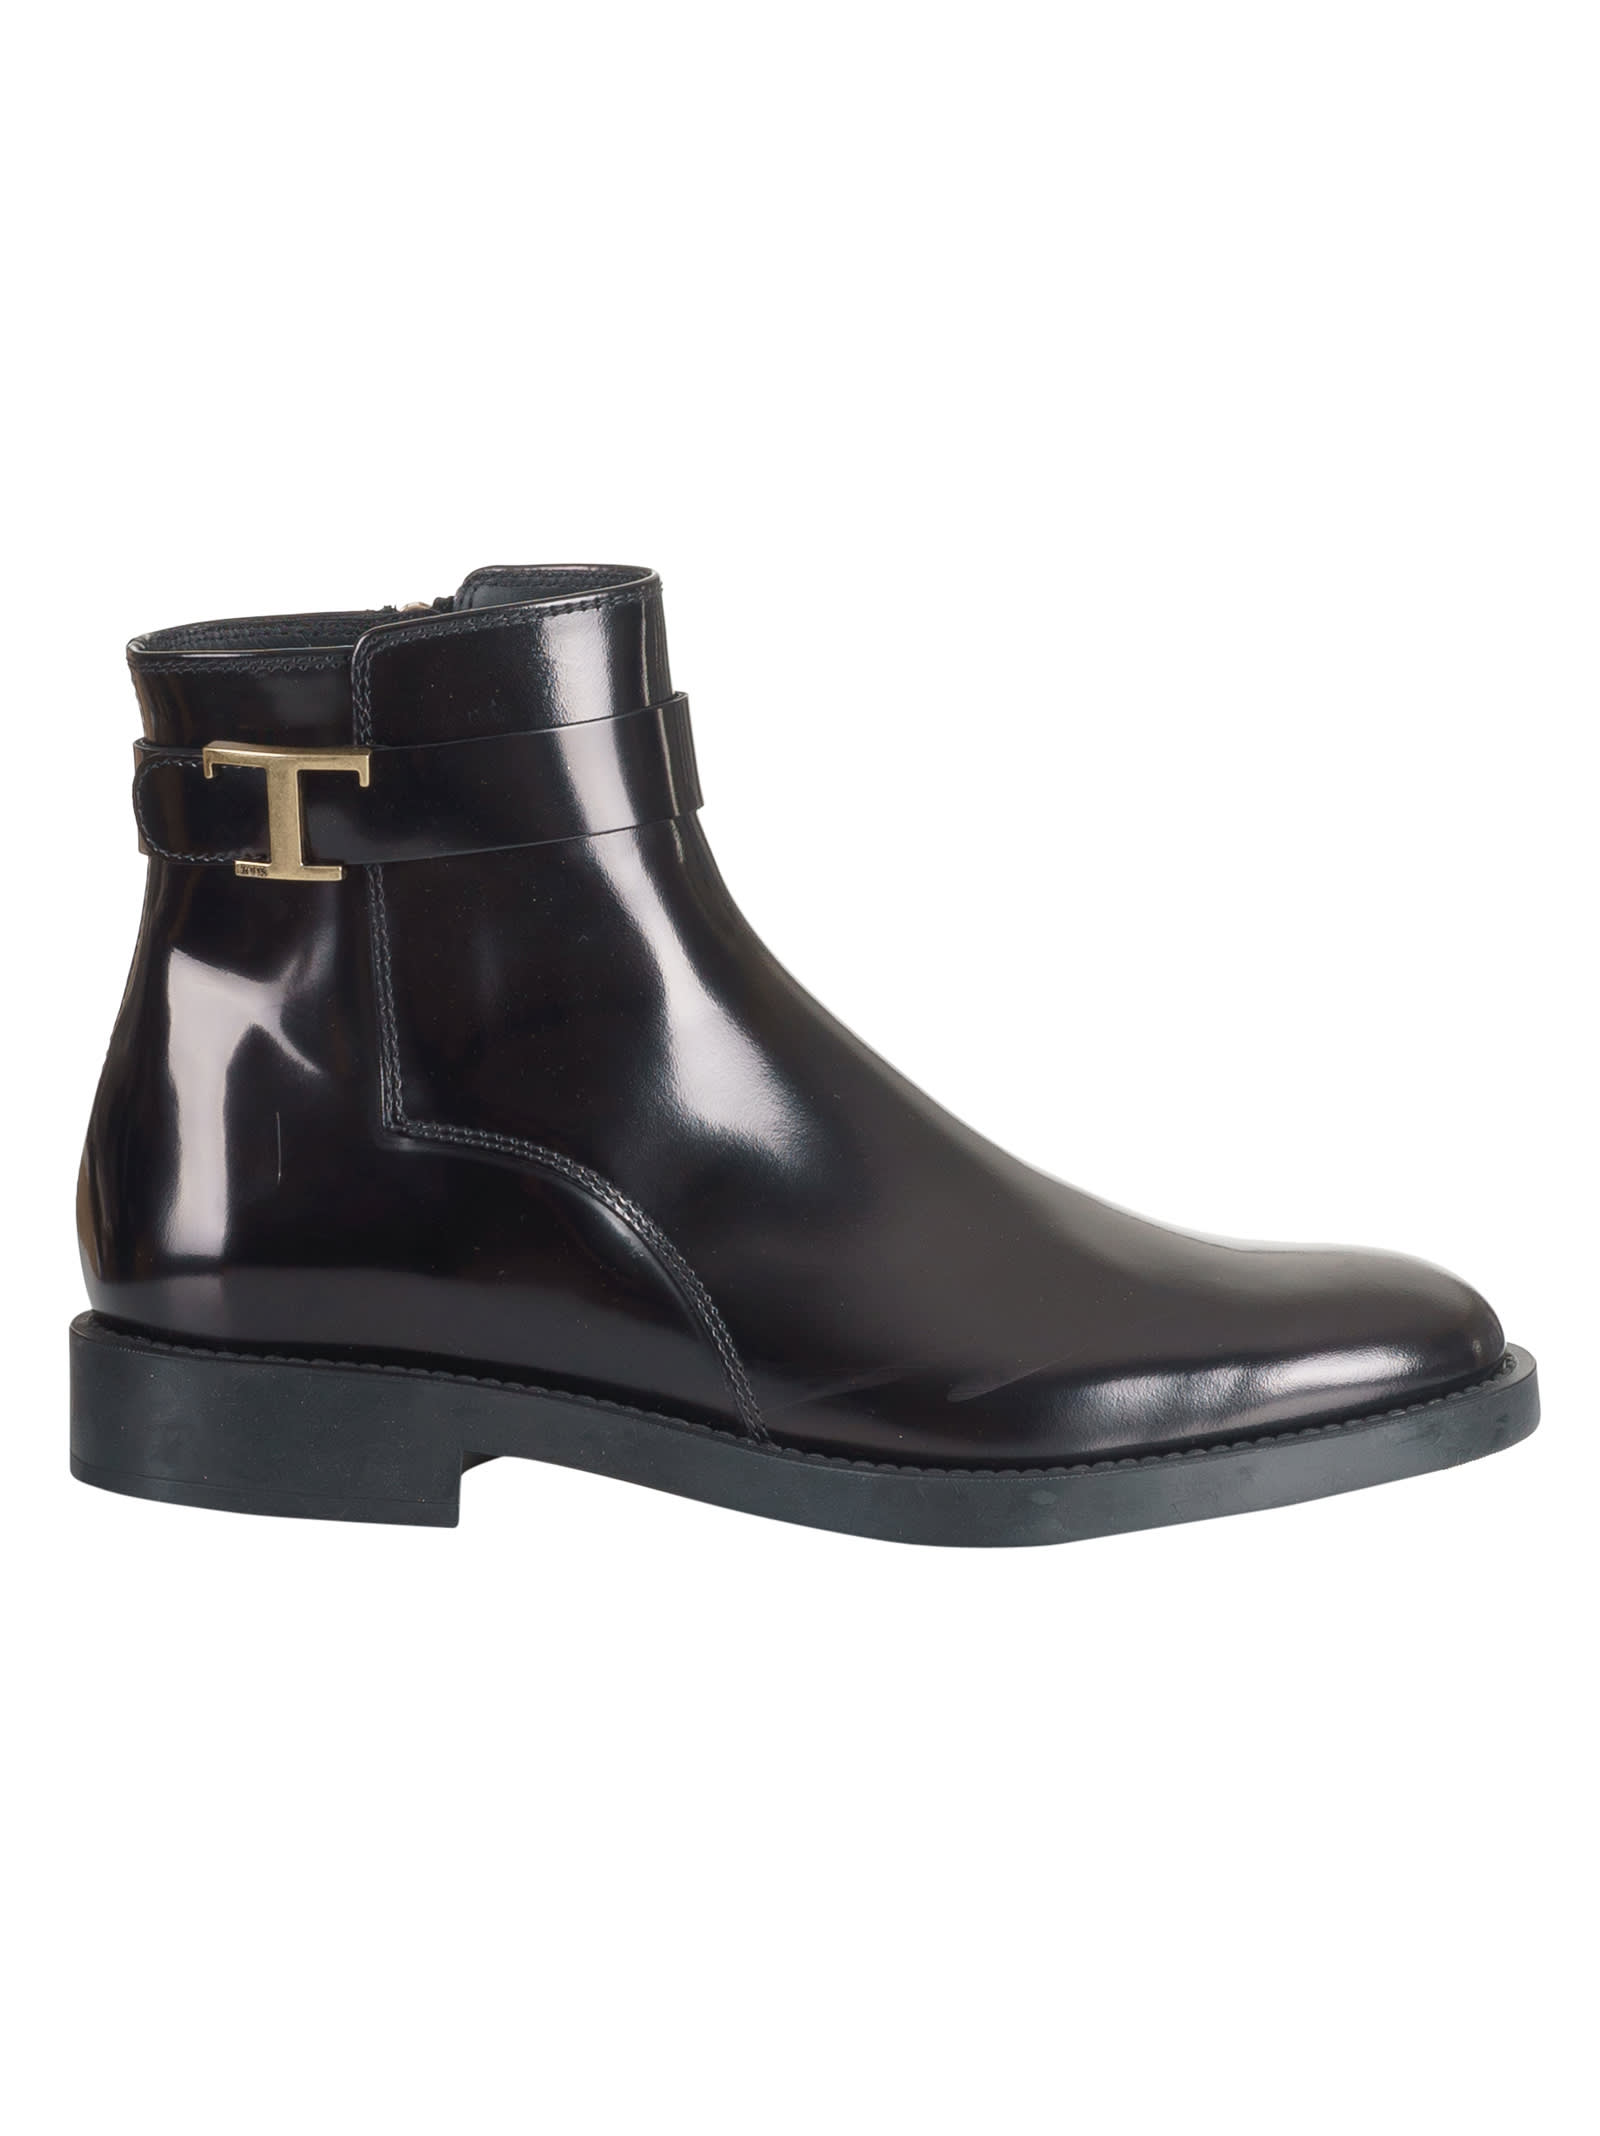 Buy Tods Side-zip Logo Plaque Ankle Boots online, shop Tods shoes with free shipping